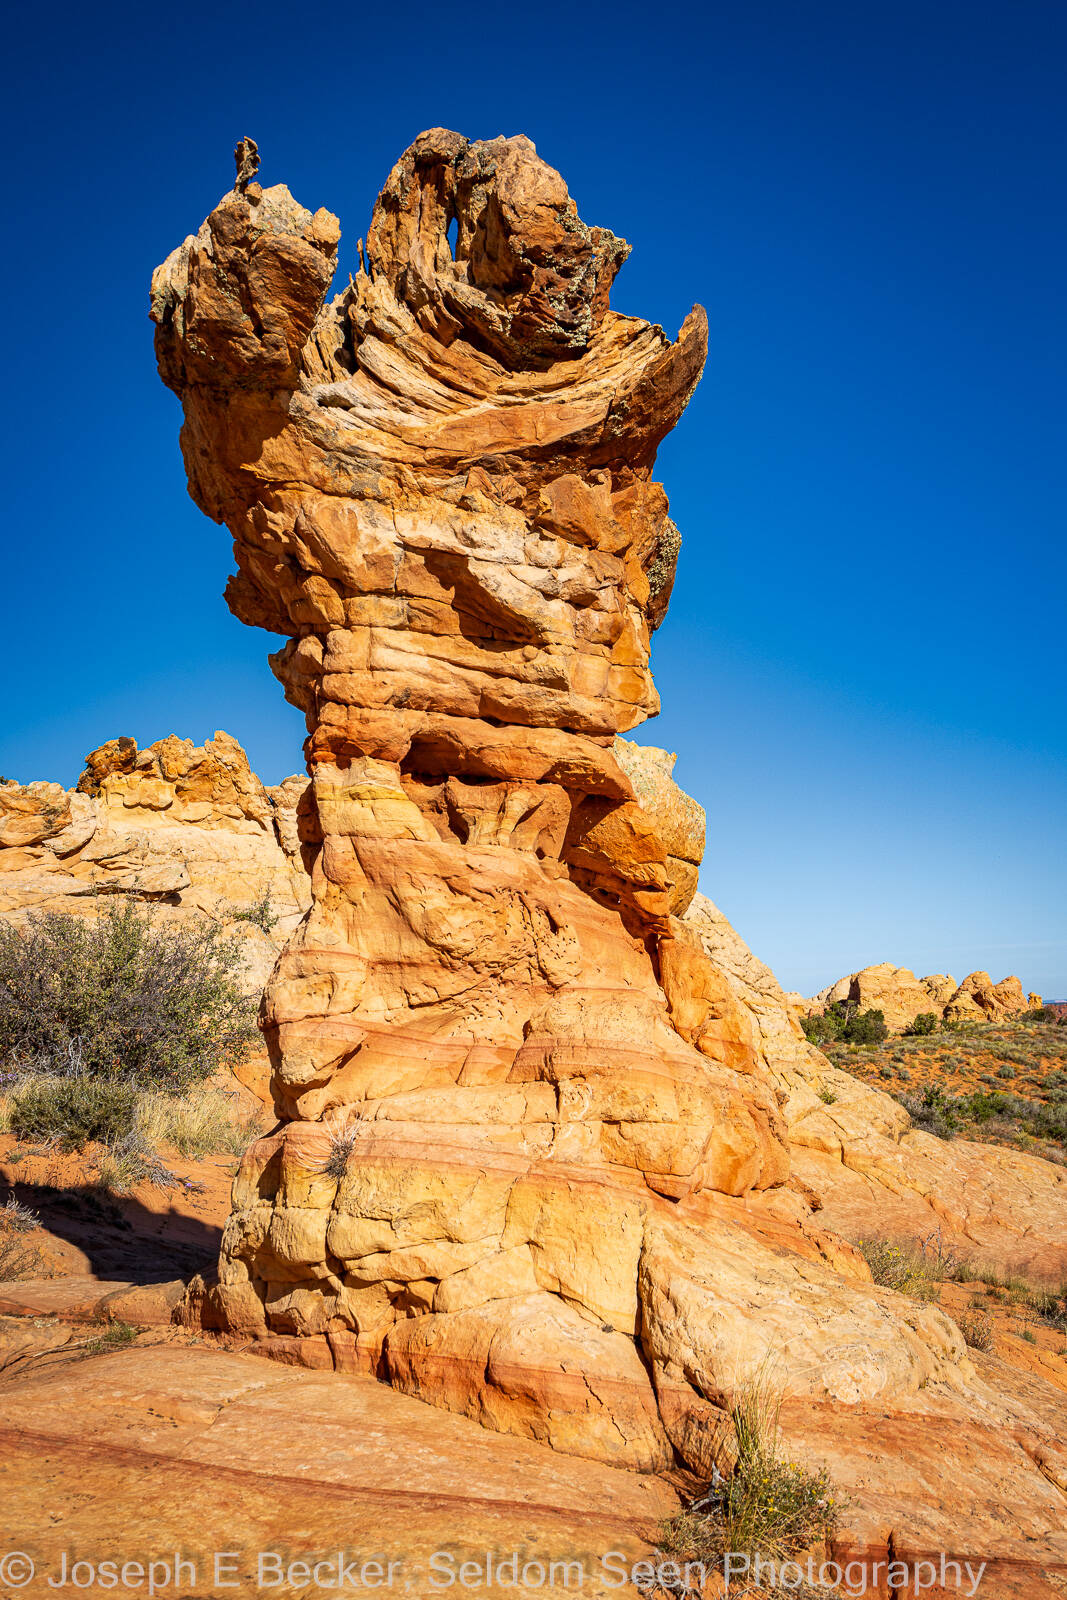 Image of South Coyote Buttes - the Olympic Torch by Joe Becker